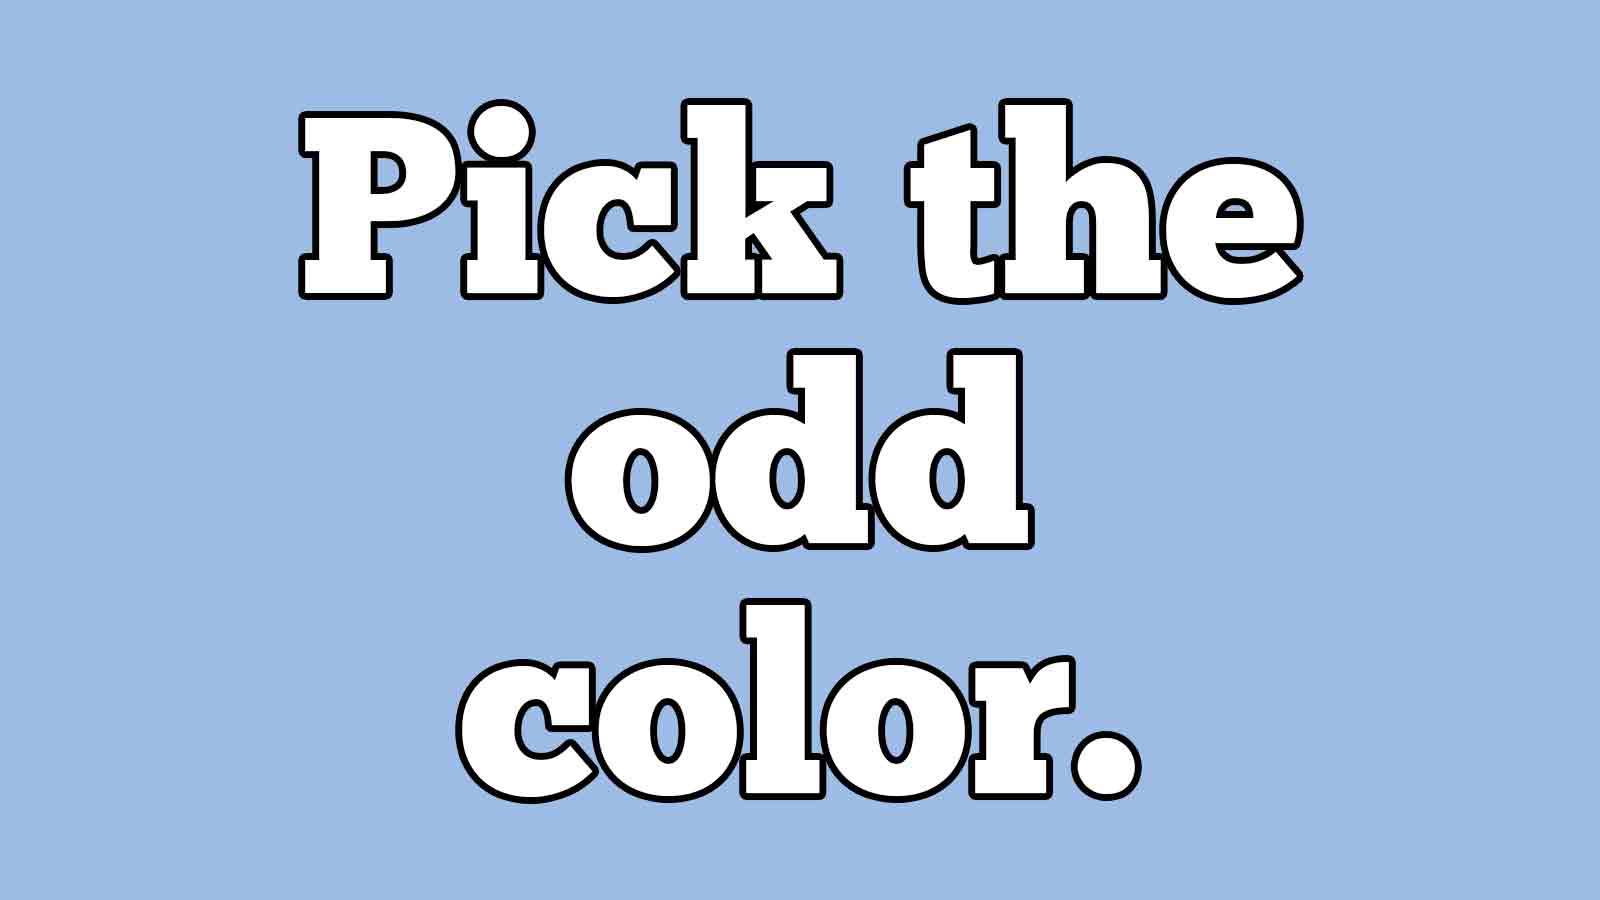 Can You Score 15/15 in This Mildly Infuriating “Odd One Out” Quiz? 1334